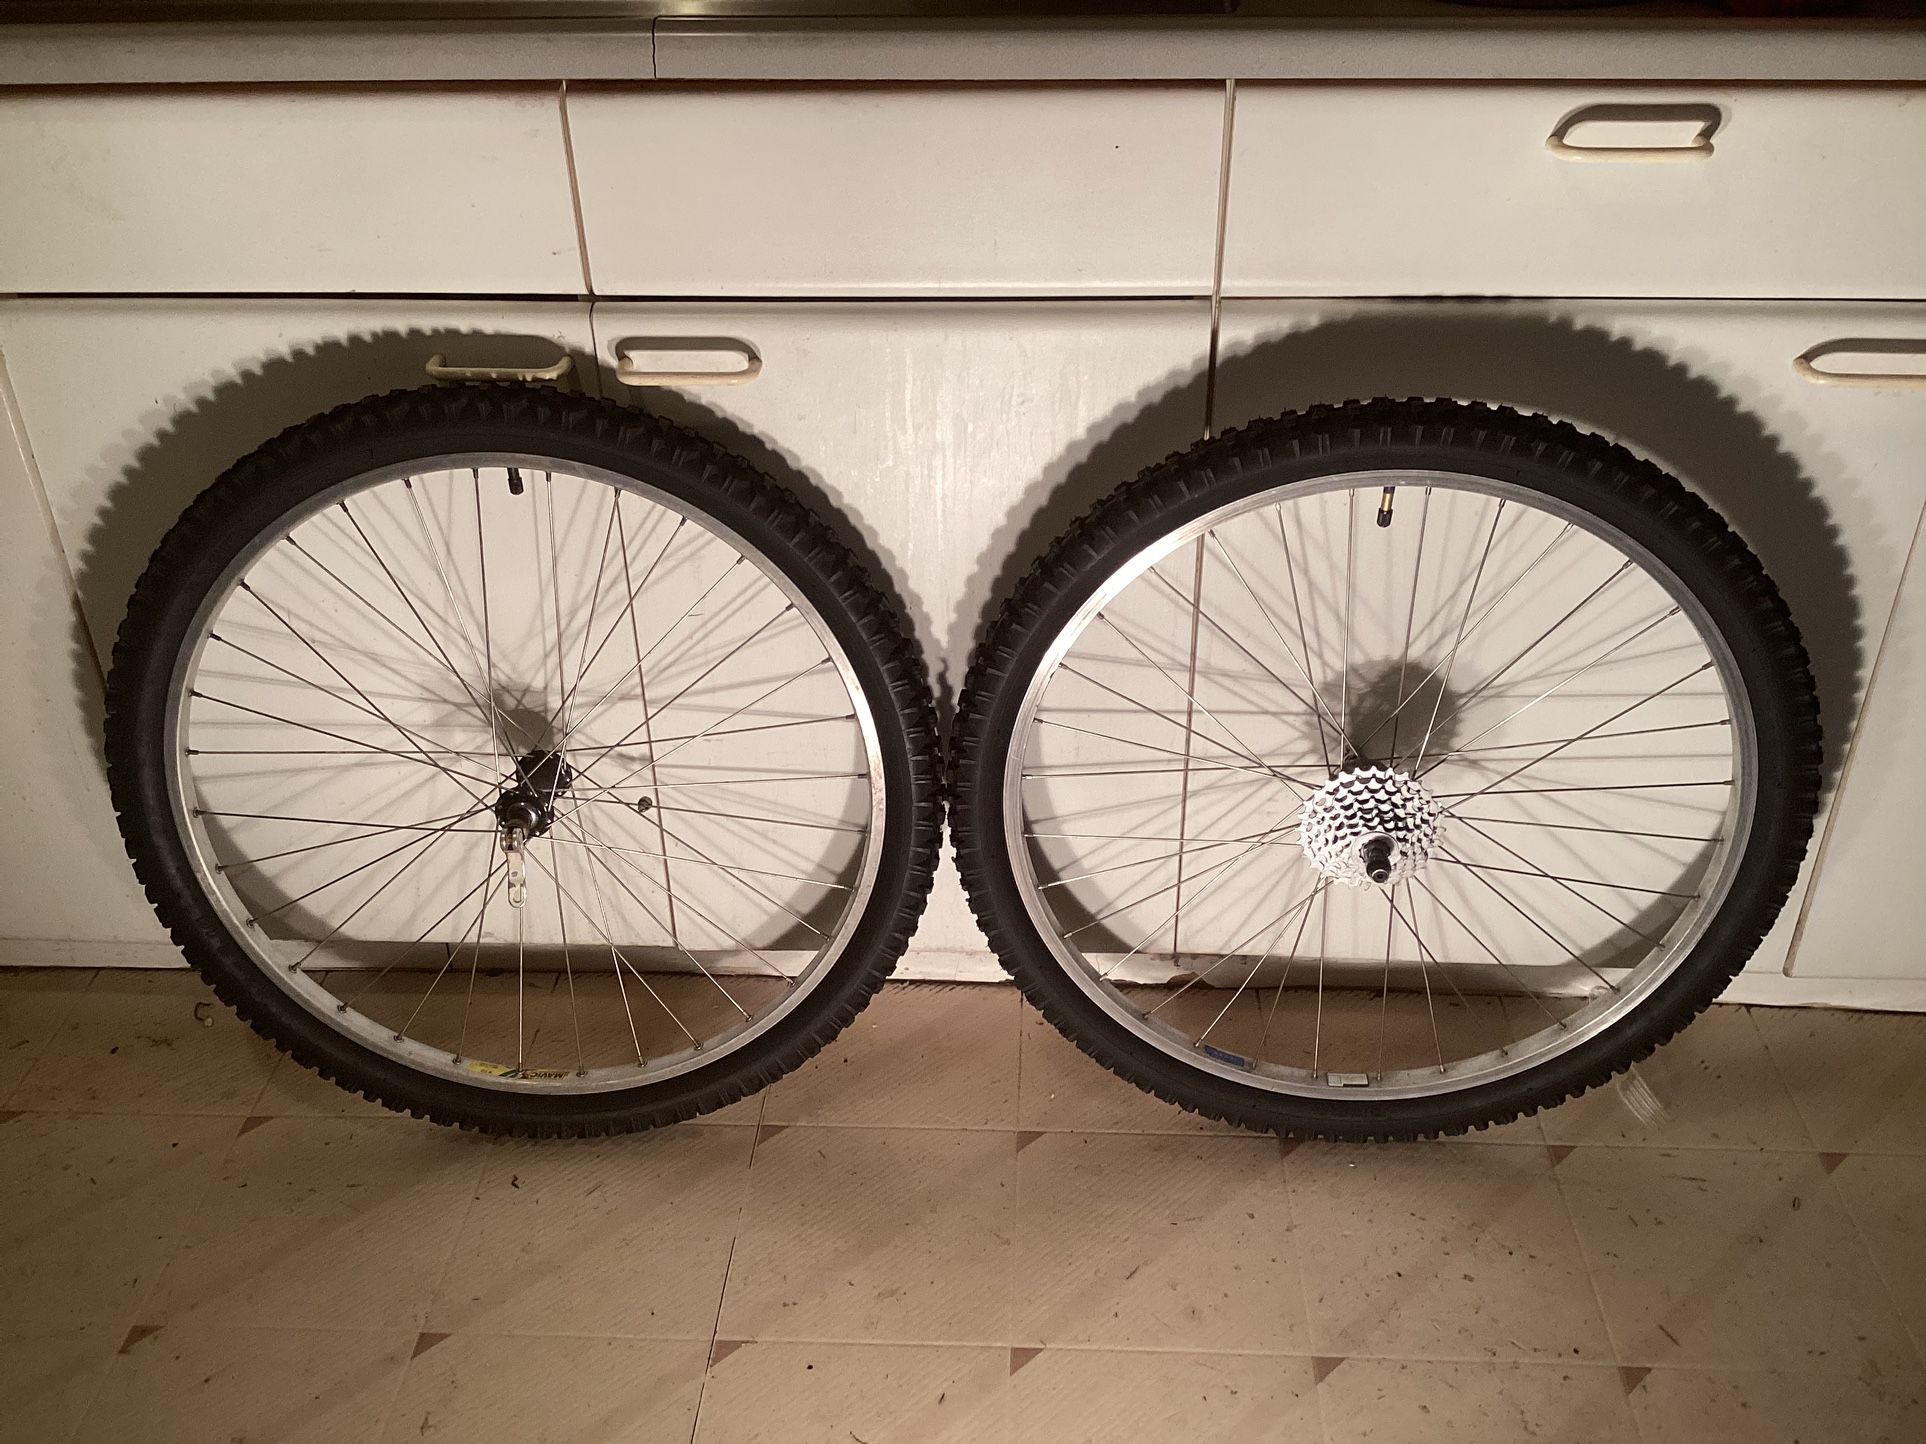 26” Mountain Bikes Wheels 7 Speed Excellent Condition Tires And Tubes News $55 Firm 